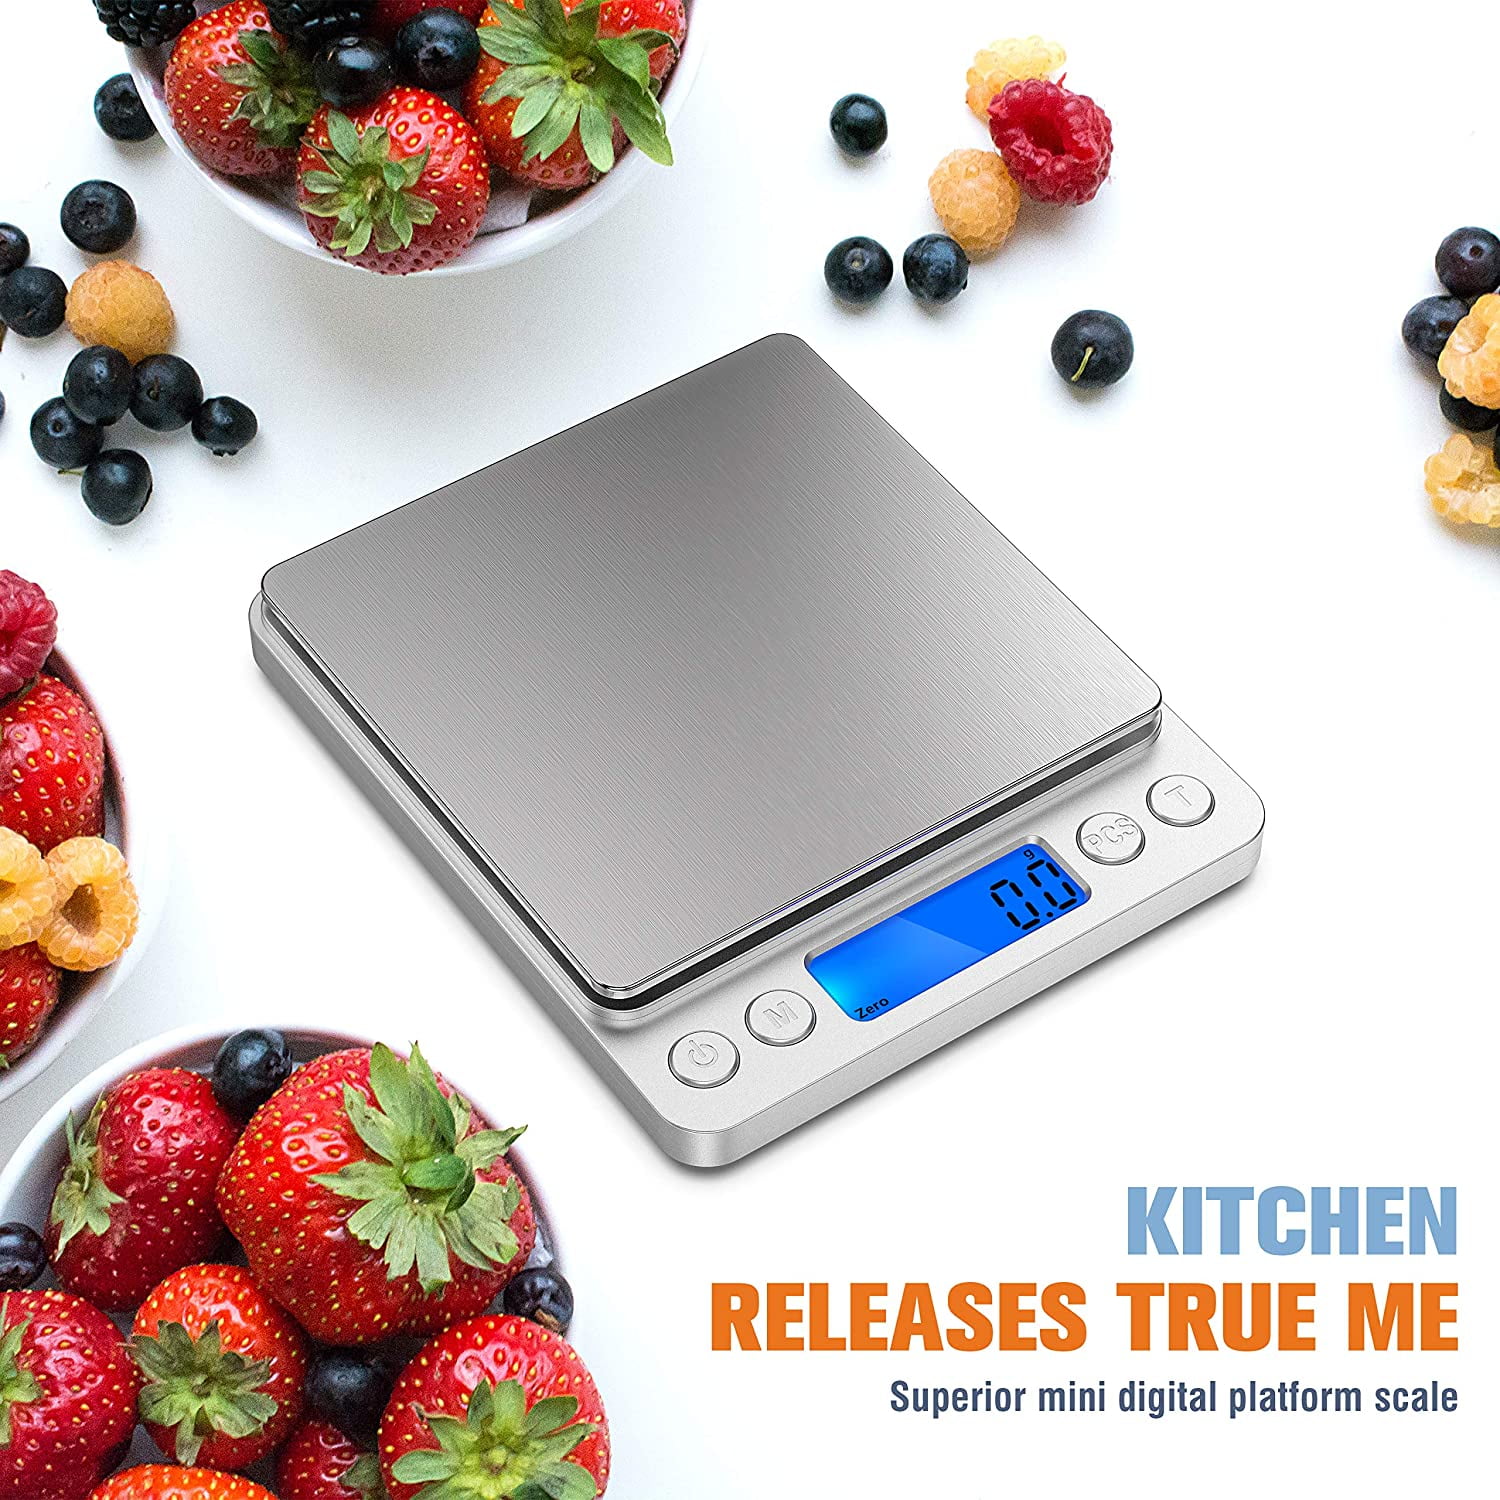 Kitchen LCD Display Gram Digital Scales Electronic Weight Balance Weighing 